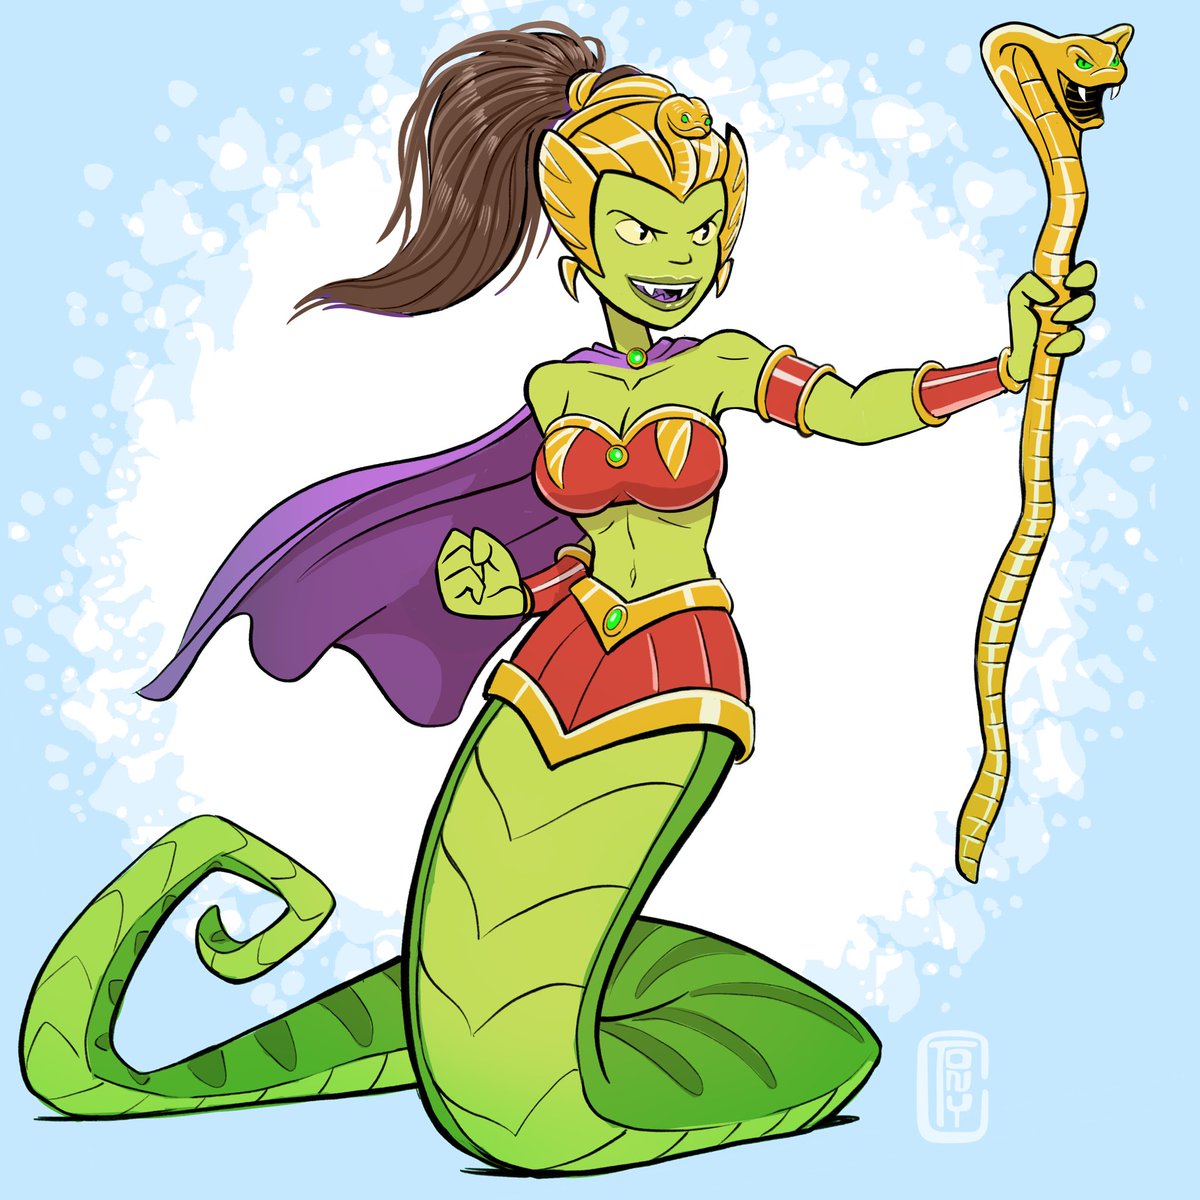 Happy Masters of the Universe Day! I believe Lady Slither is the only MotU character I have ever drawn #motu #motuday #mastersoftheuniverse #mastersoftheuniverseday #happymastersoftheuniverseday #ladyslither #characterdesign